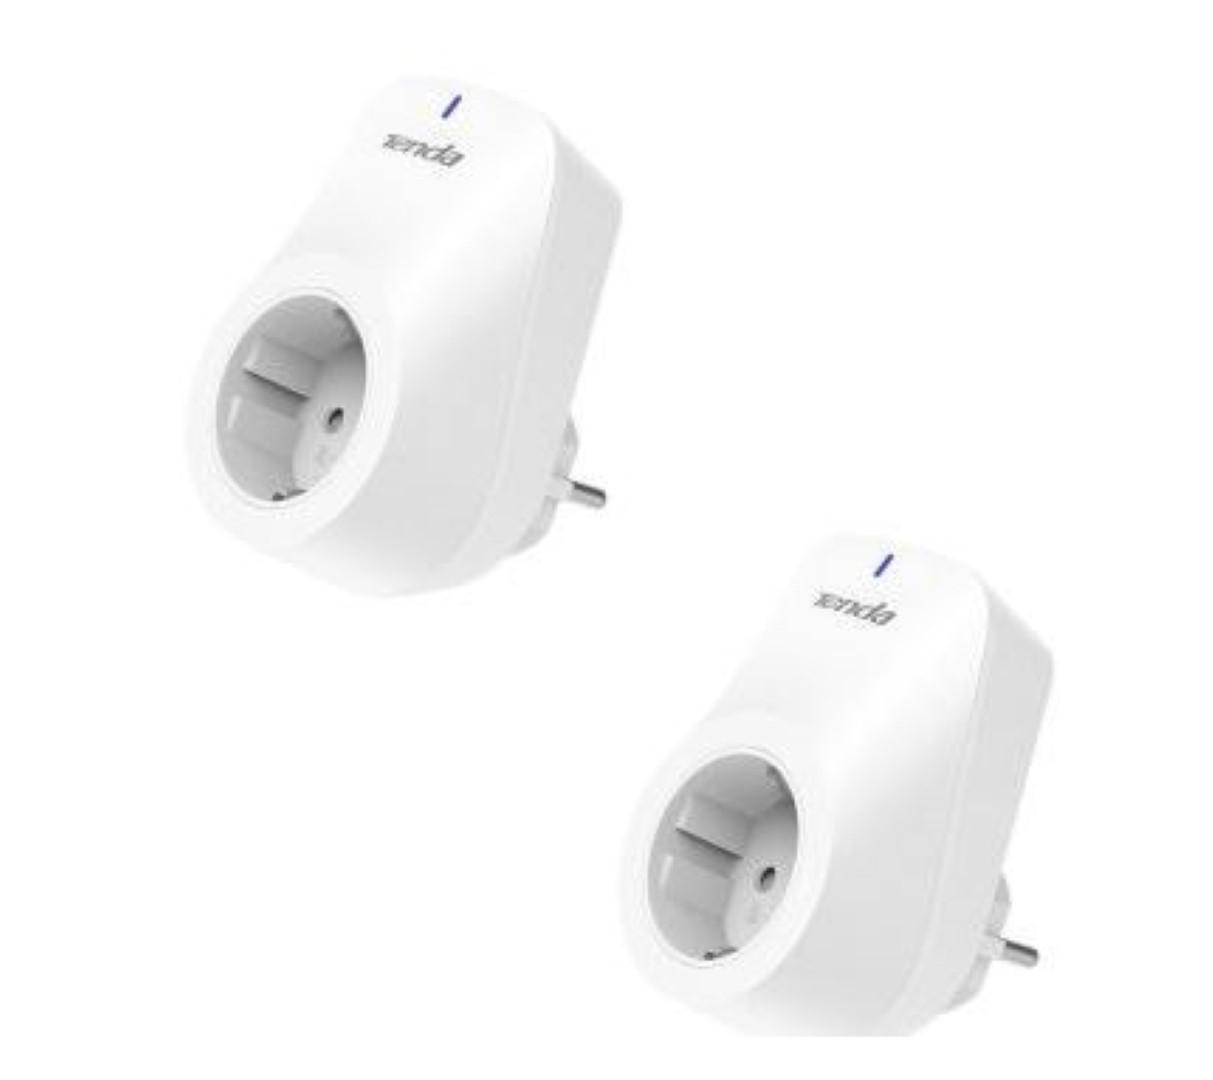 TENDA BELI SMART WI-FI PLUG SP6 (2 PACK), Wireless Standard:IEEE 802.12b/g/n, 2.4GHz,1T1R, Android 4.4 or higher, iOS 9.0 or higher, Certification:CE,EAC,RoHS, Maximum Consumption:3.68KW.